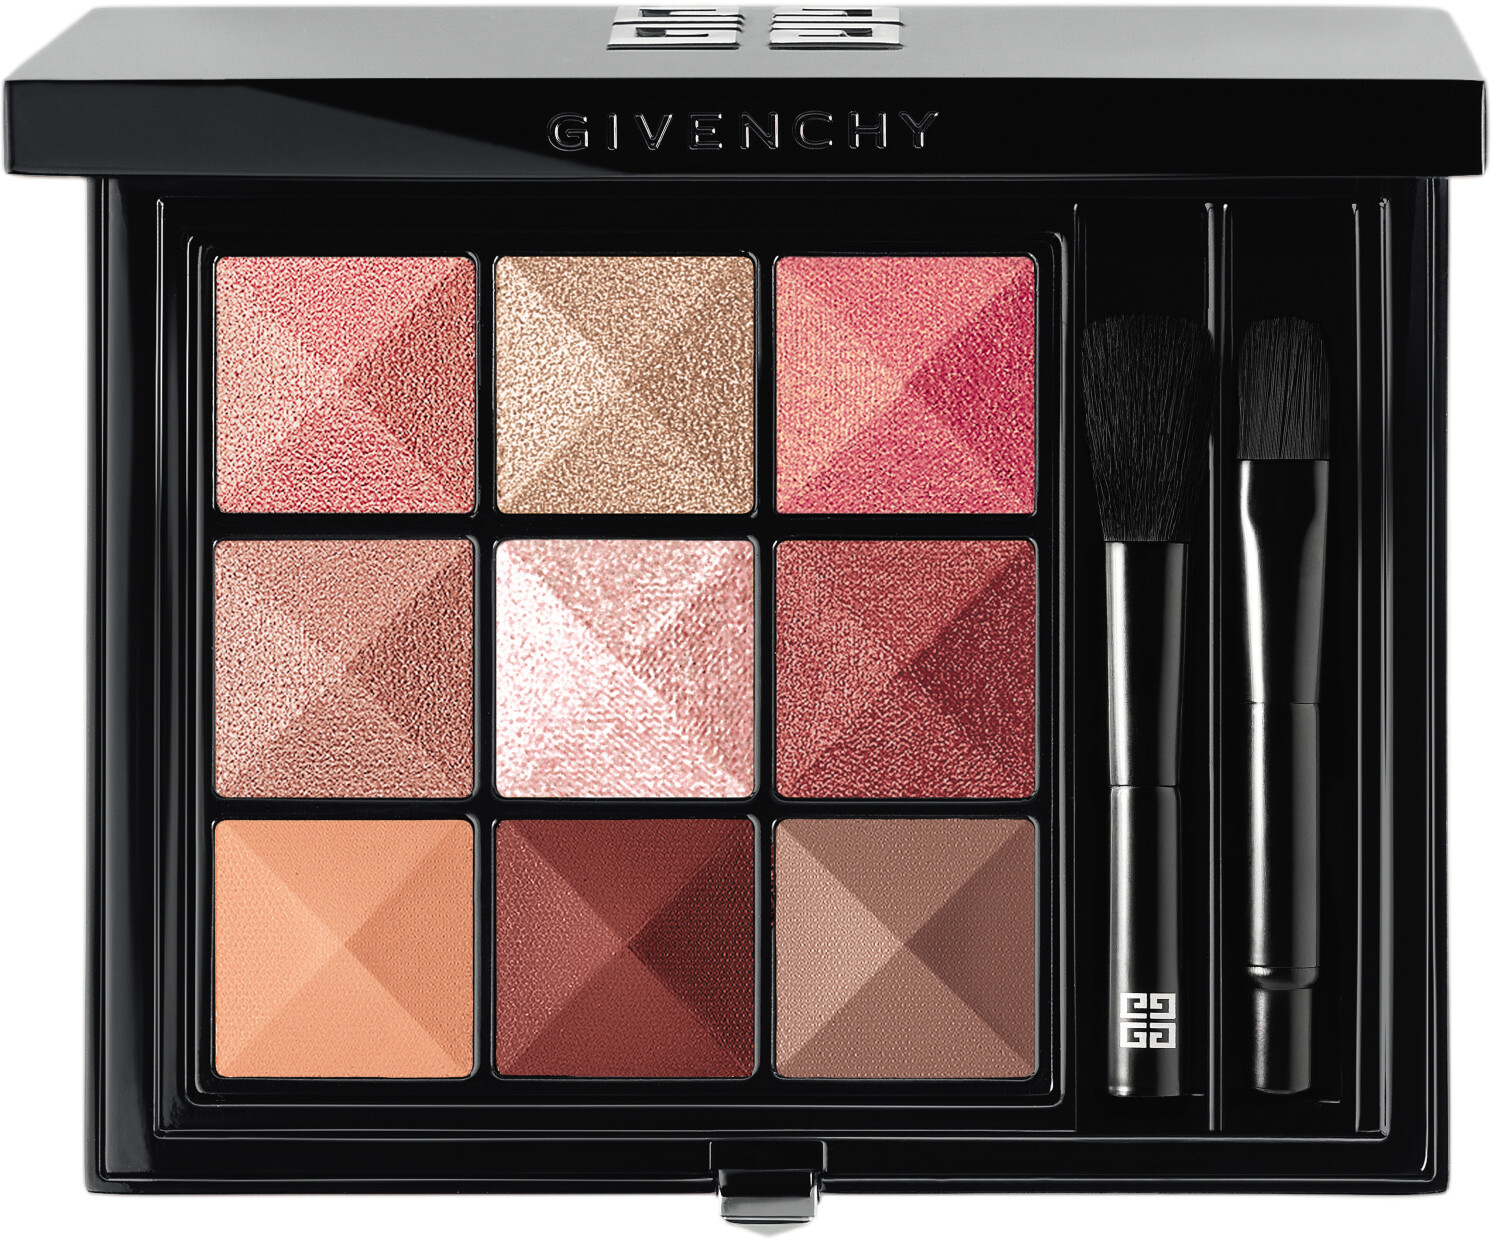 GIVENCHY Le 9 De Givenchy Eyeshadow Palette 8g Le 9.09